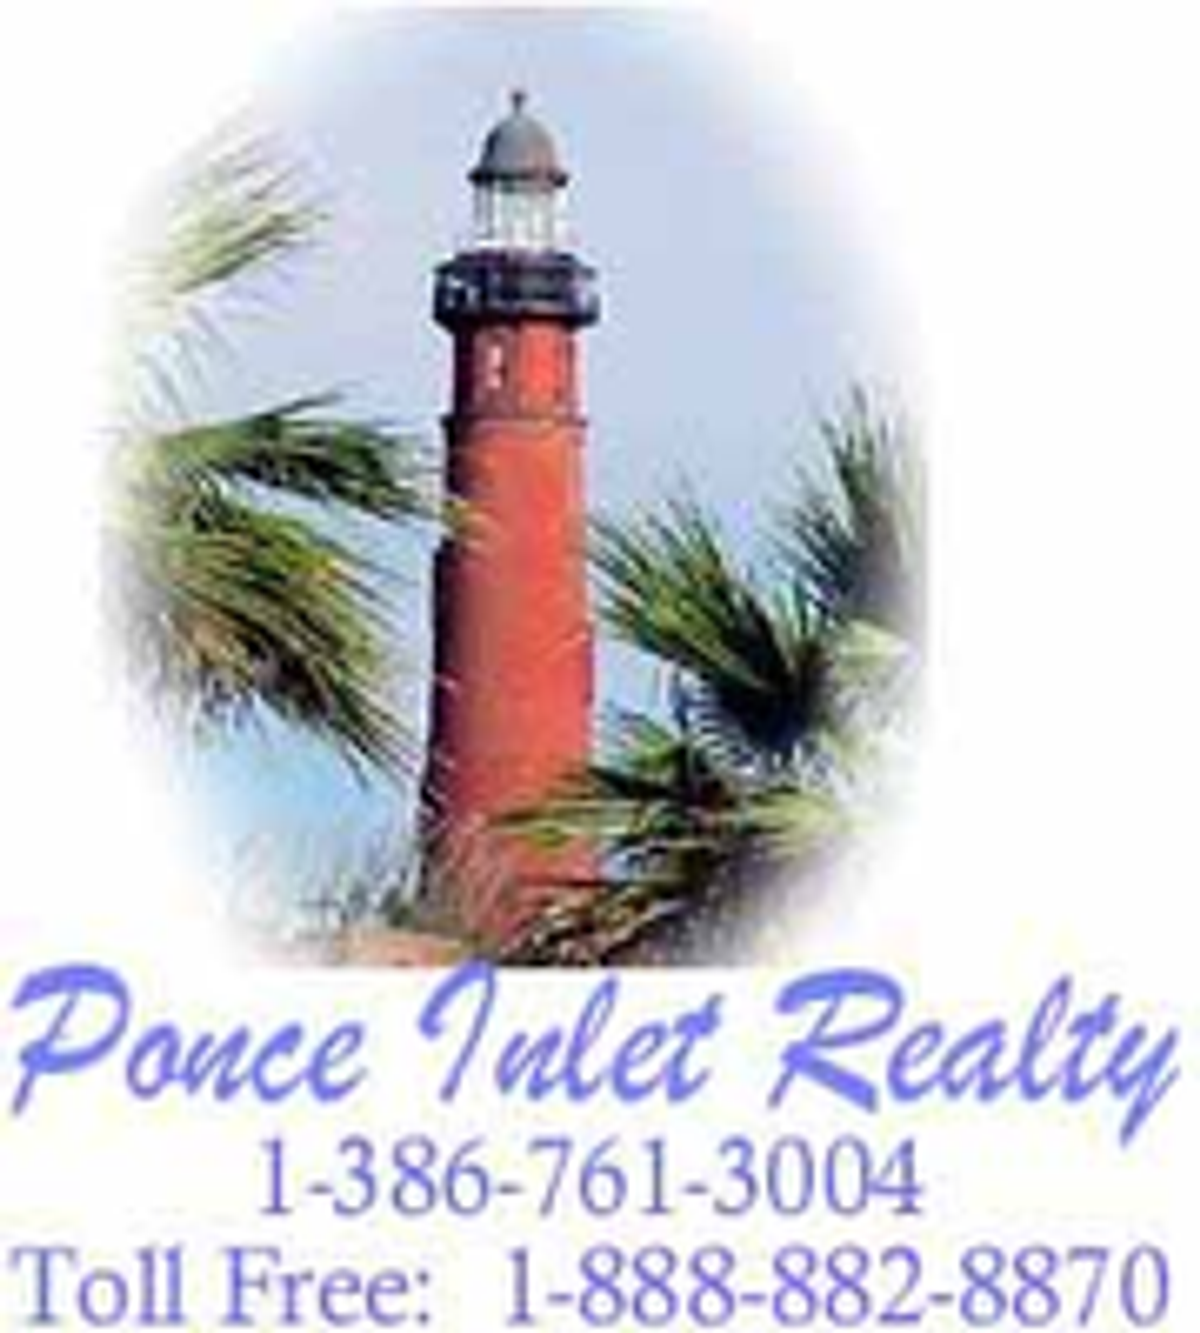 Photo for Summer Frarer, Listing Agent at Ponce Inlet Realty, Inc